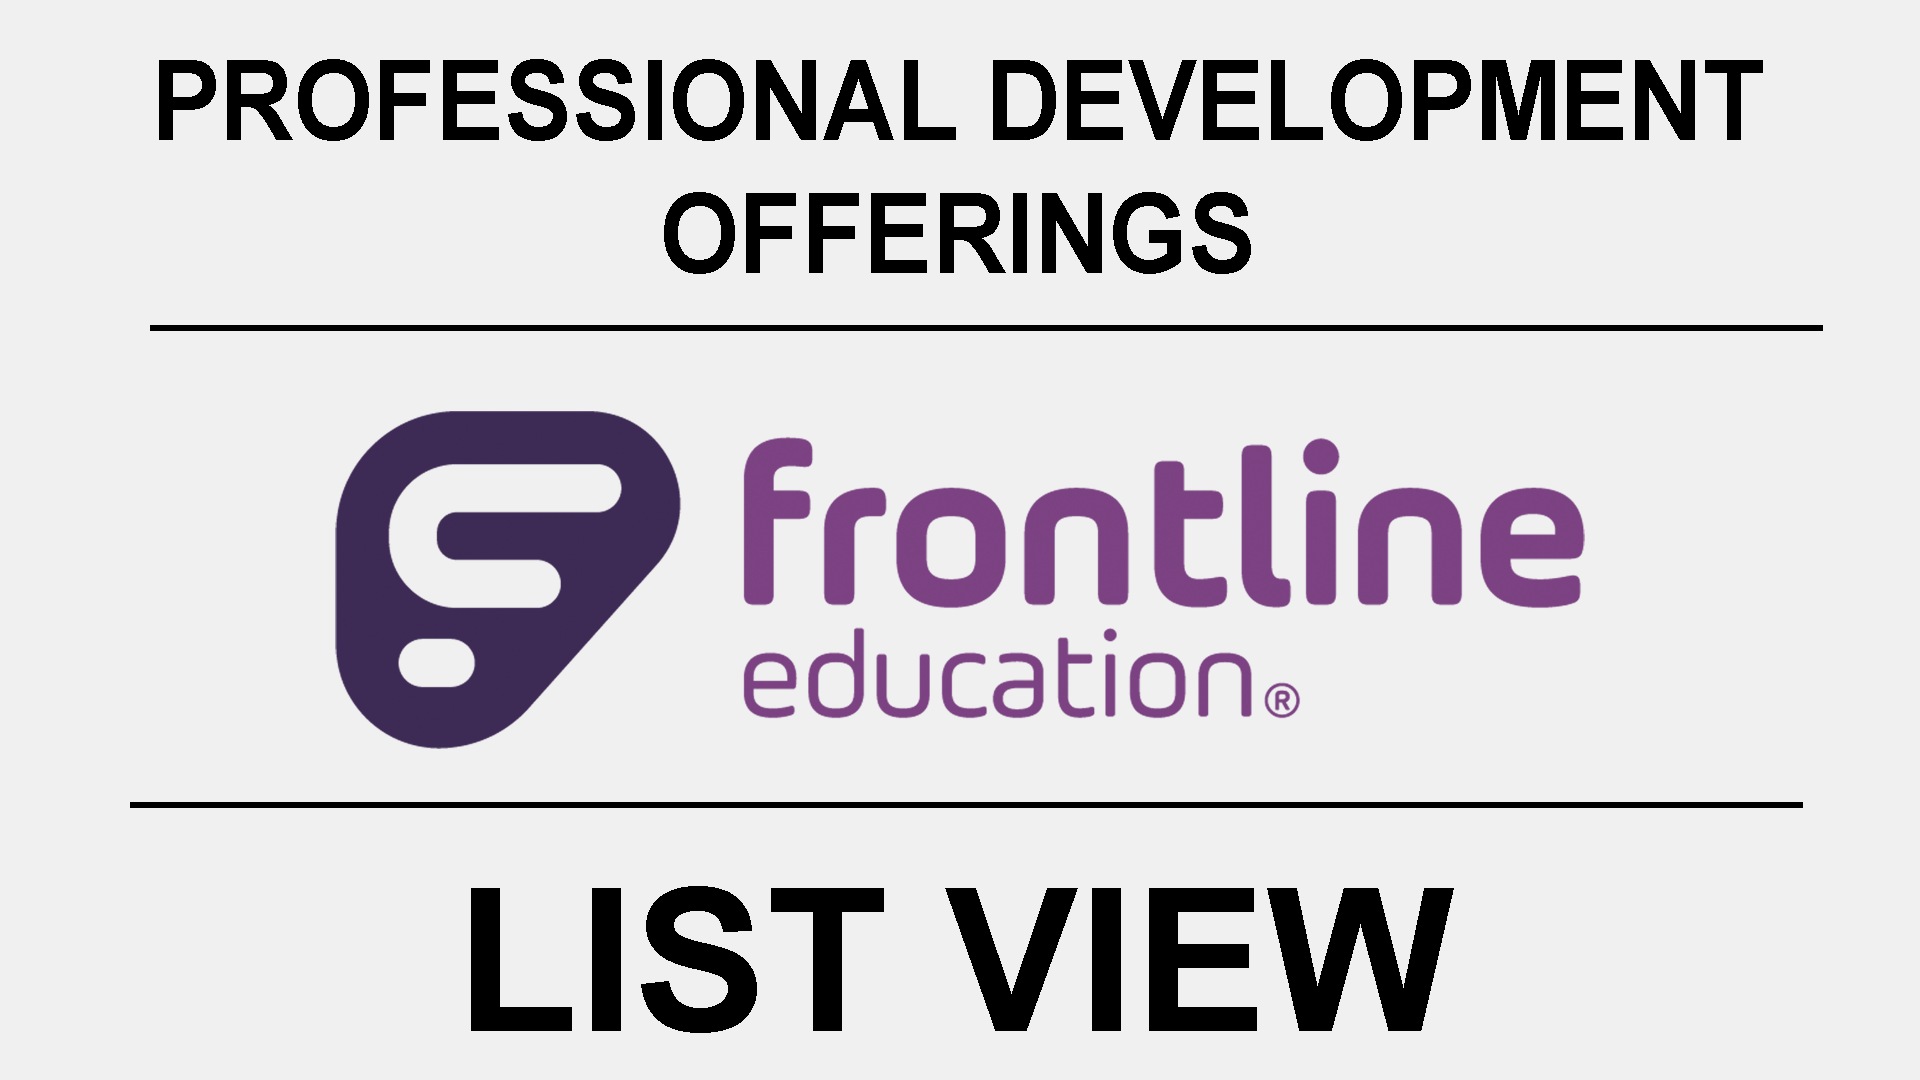 PD Offerings List View